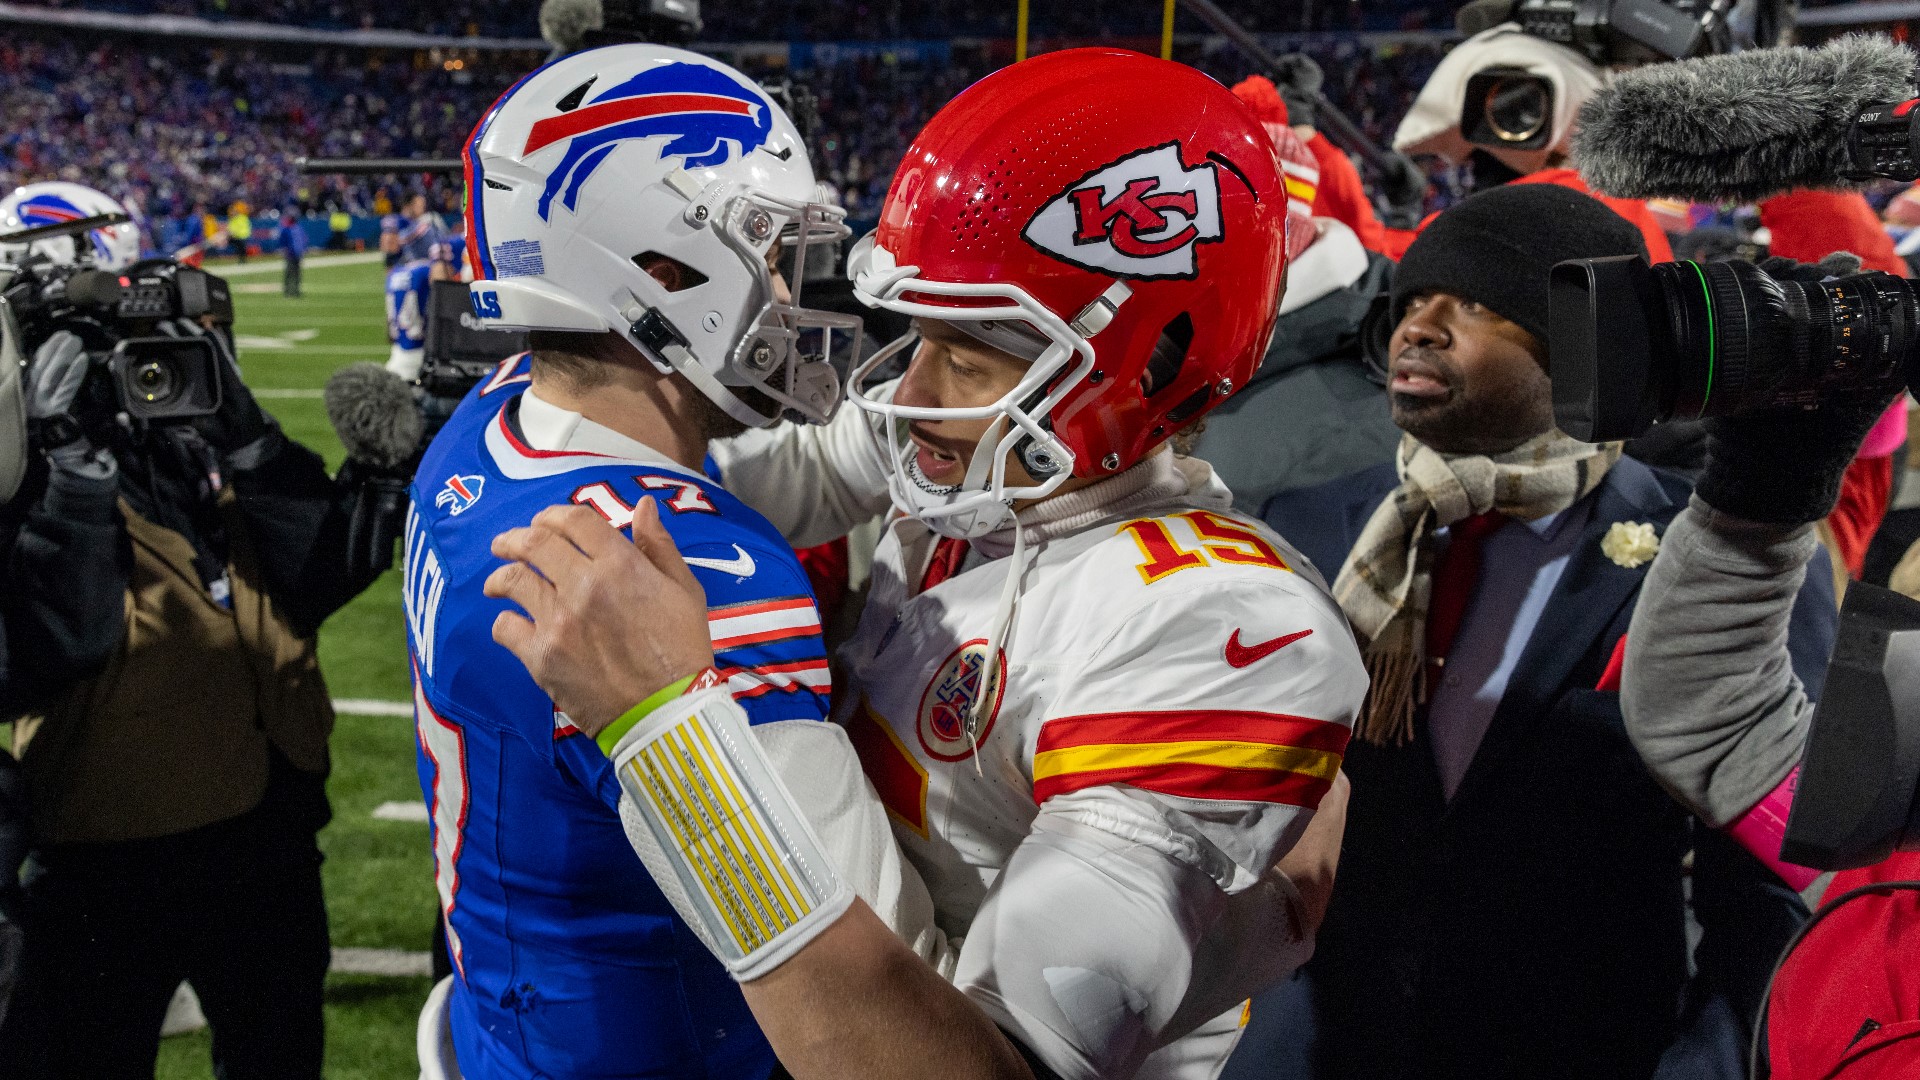 Buffalo Bills vs. Kansas City Chiefs: See photos from the playoff game